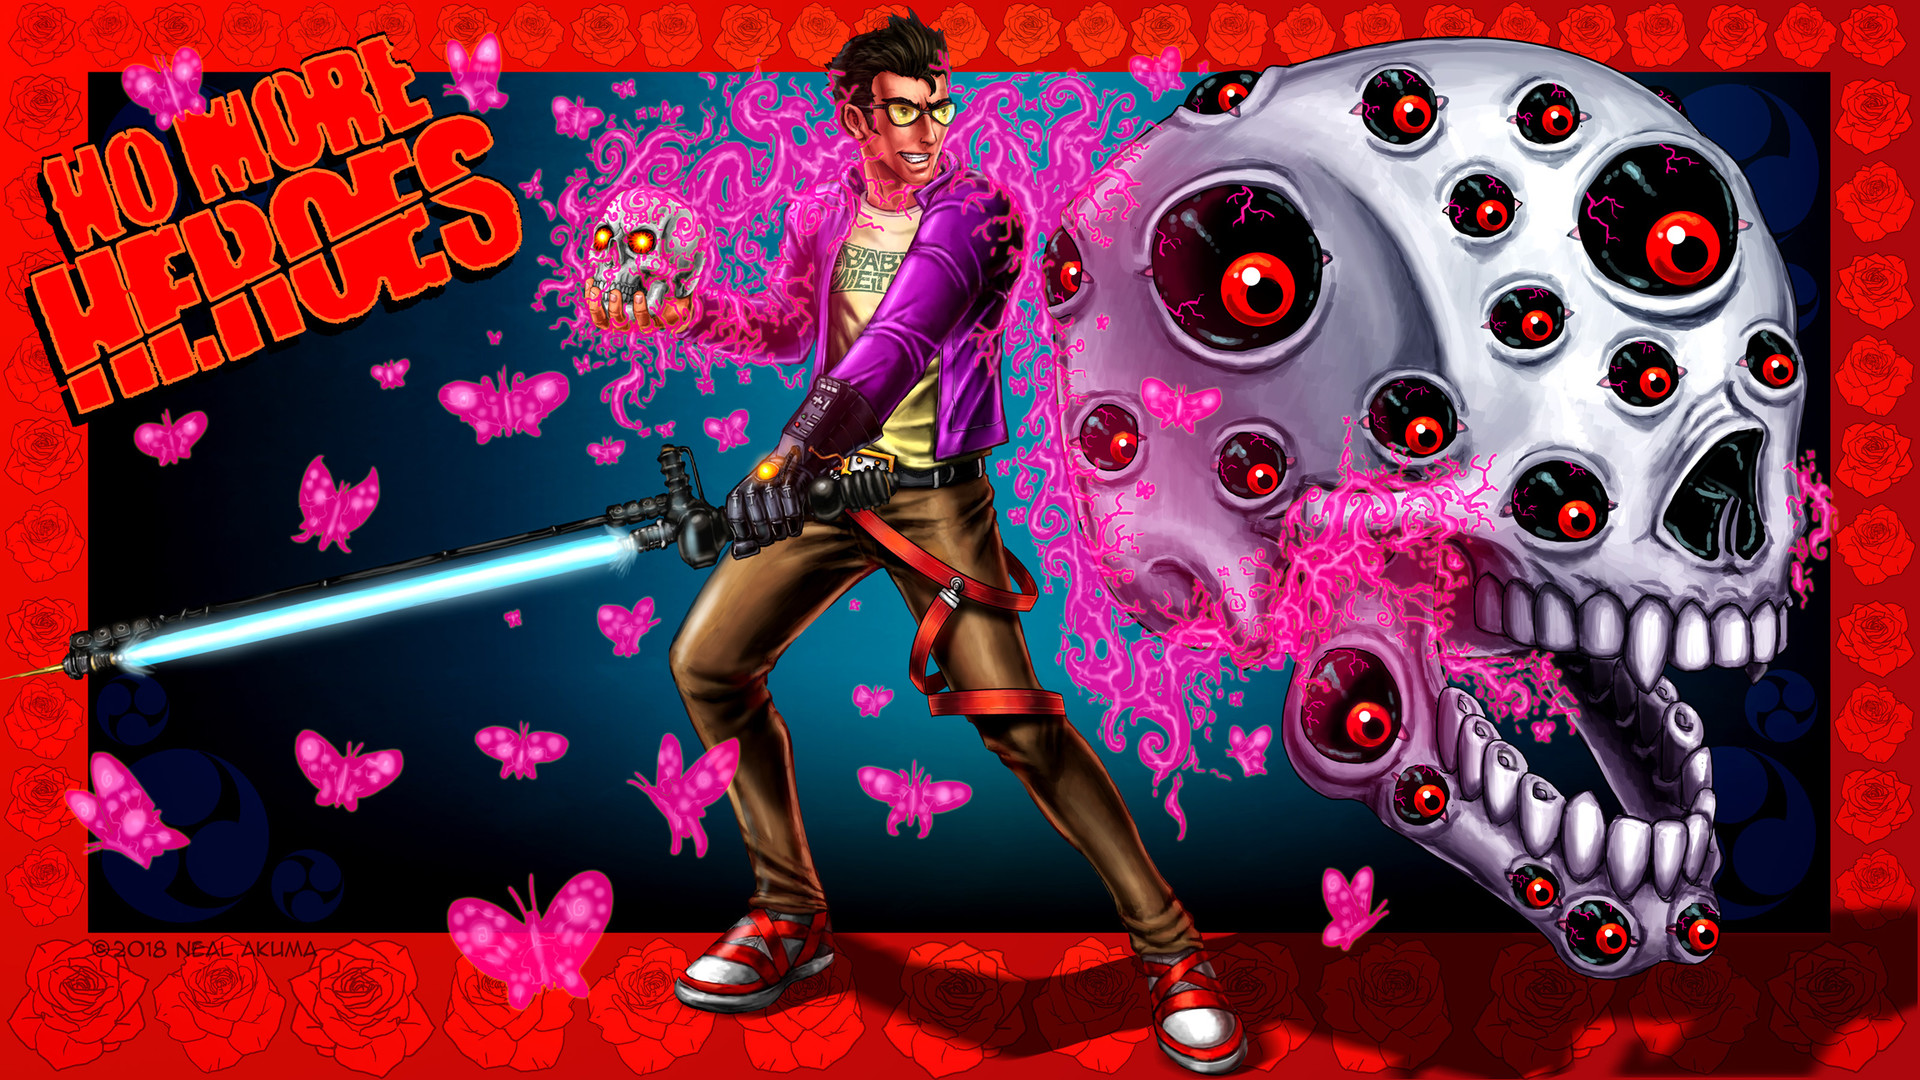 No More Heroes 3 Live Wallpaper  1920x1080  Rare Gallery HD Live  Wallpapers